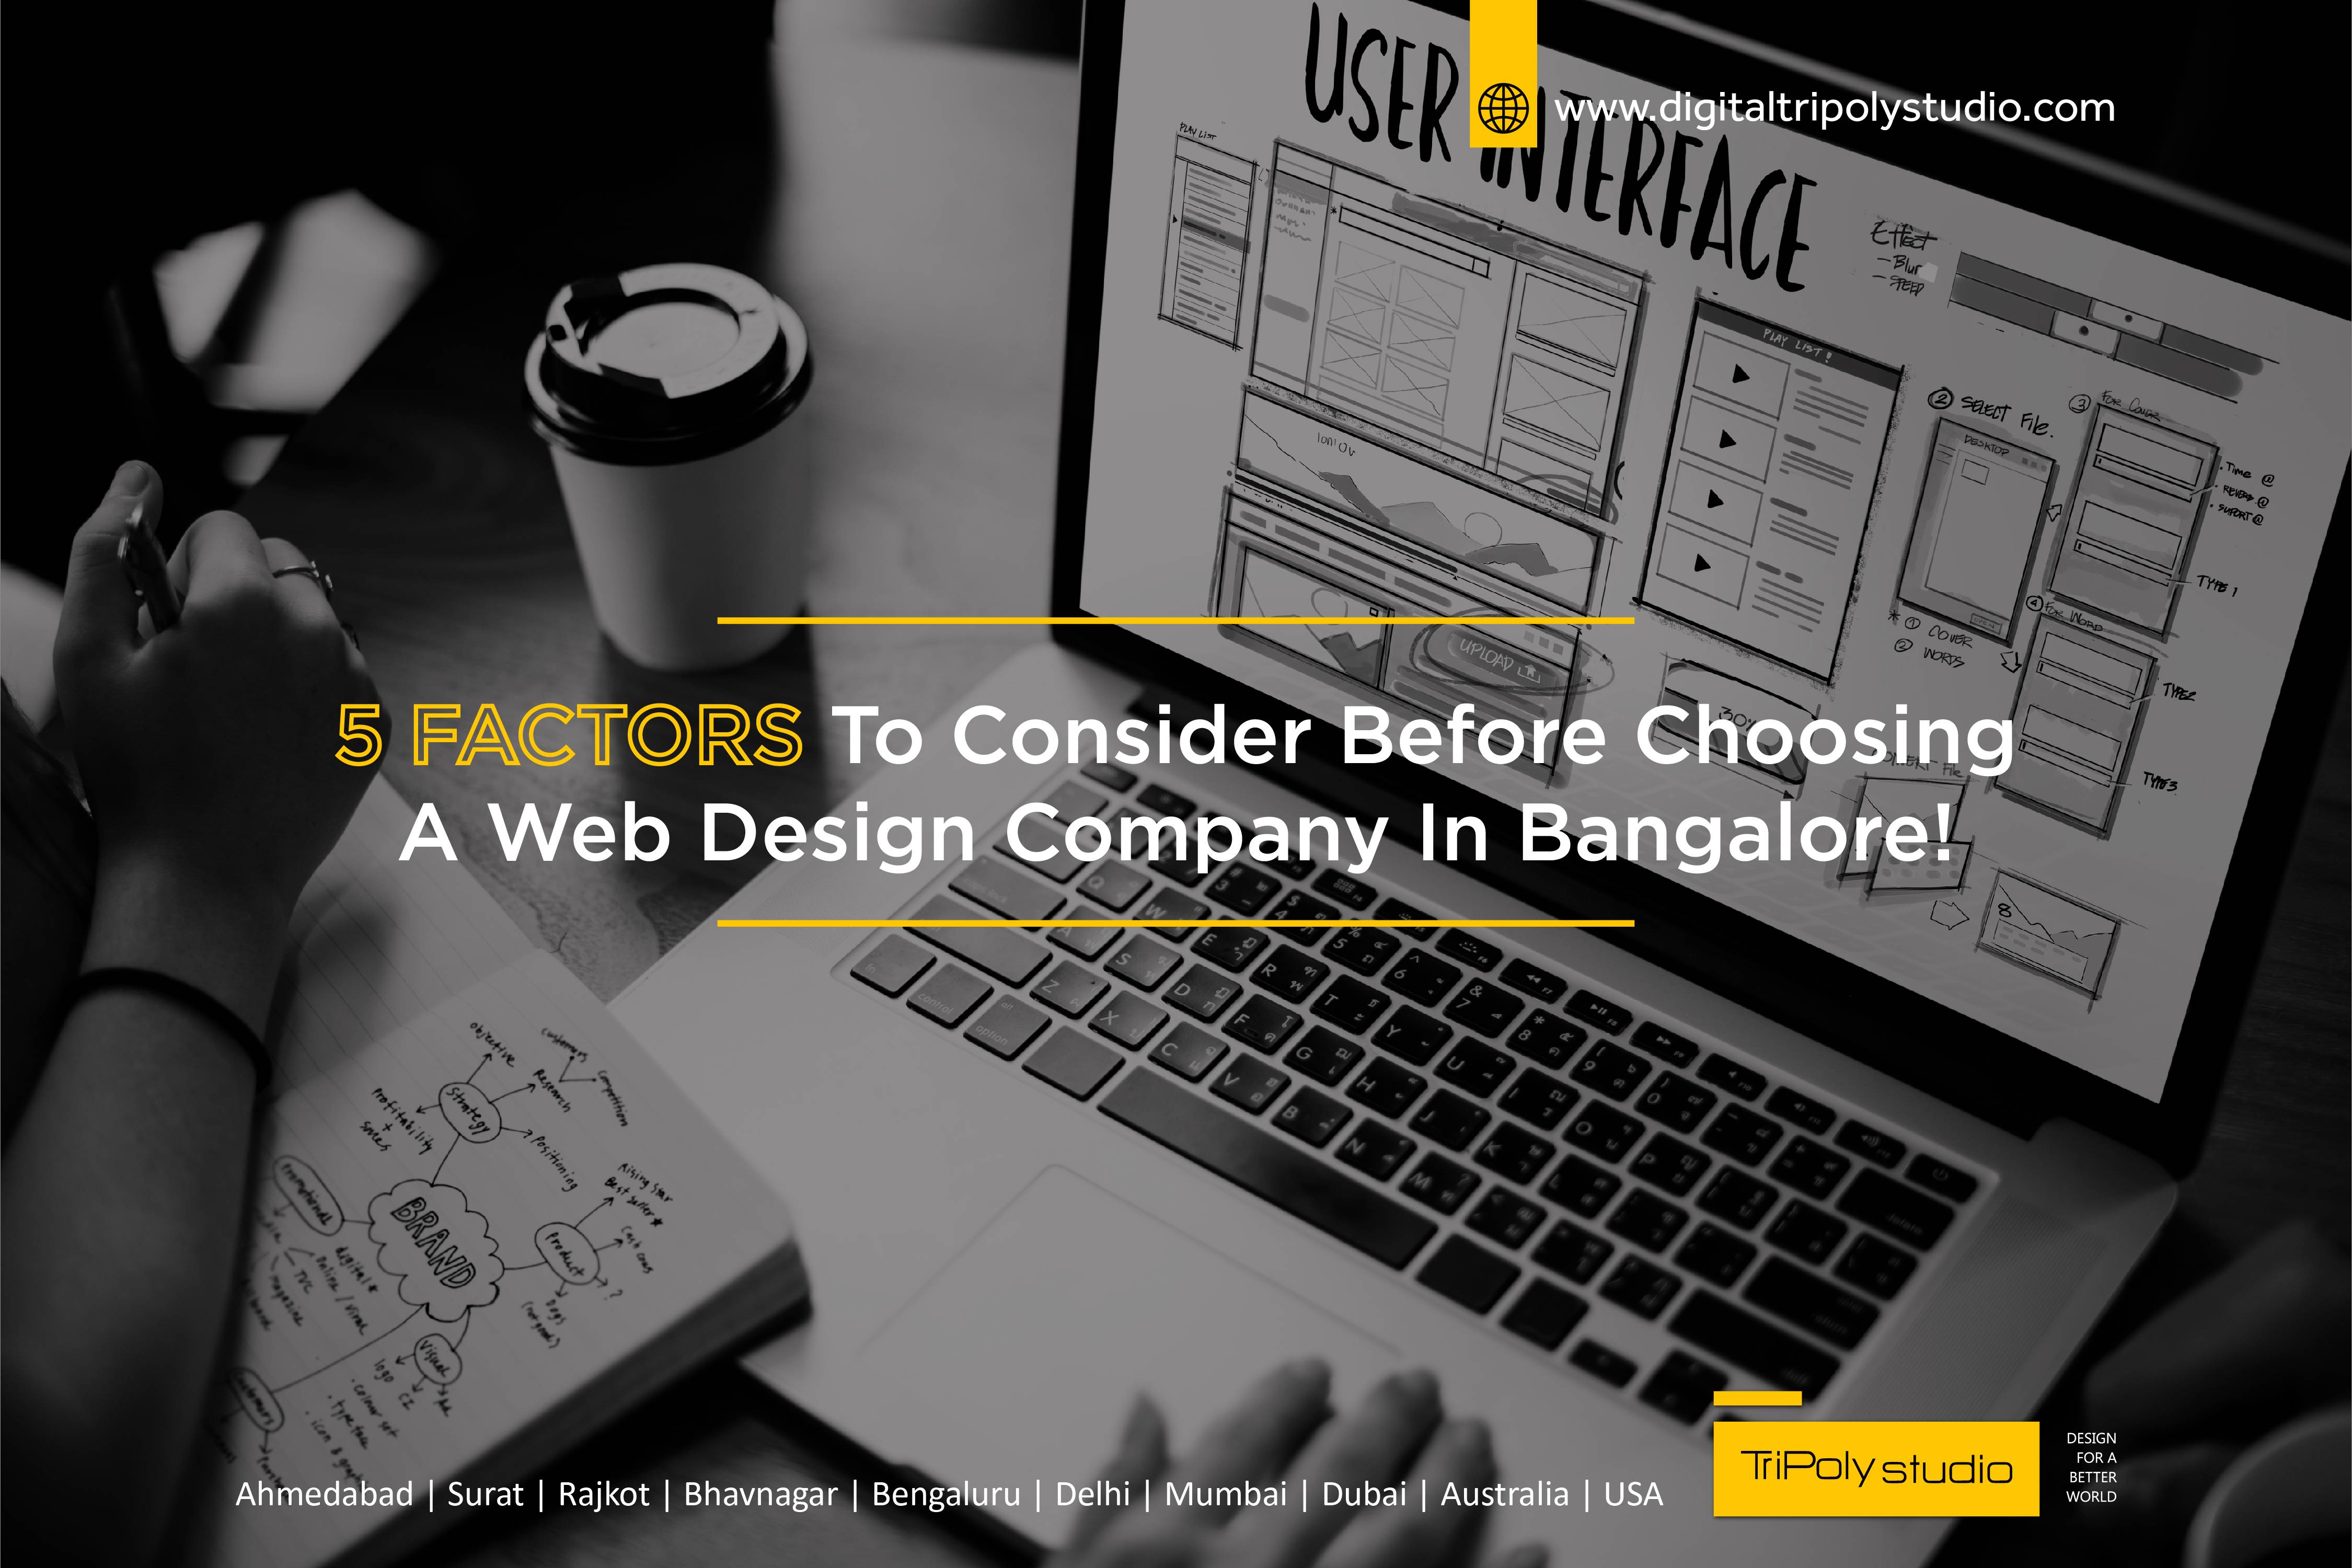 5 factors to consider before choosing a web design company in bangalore